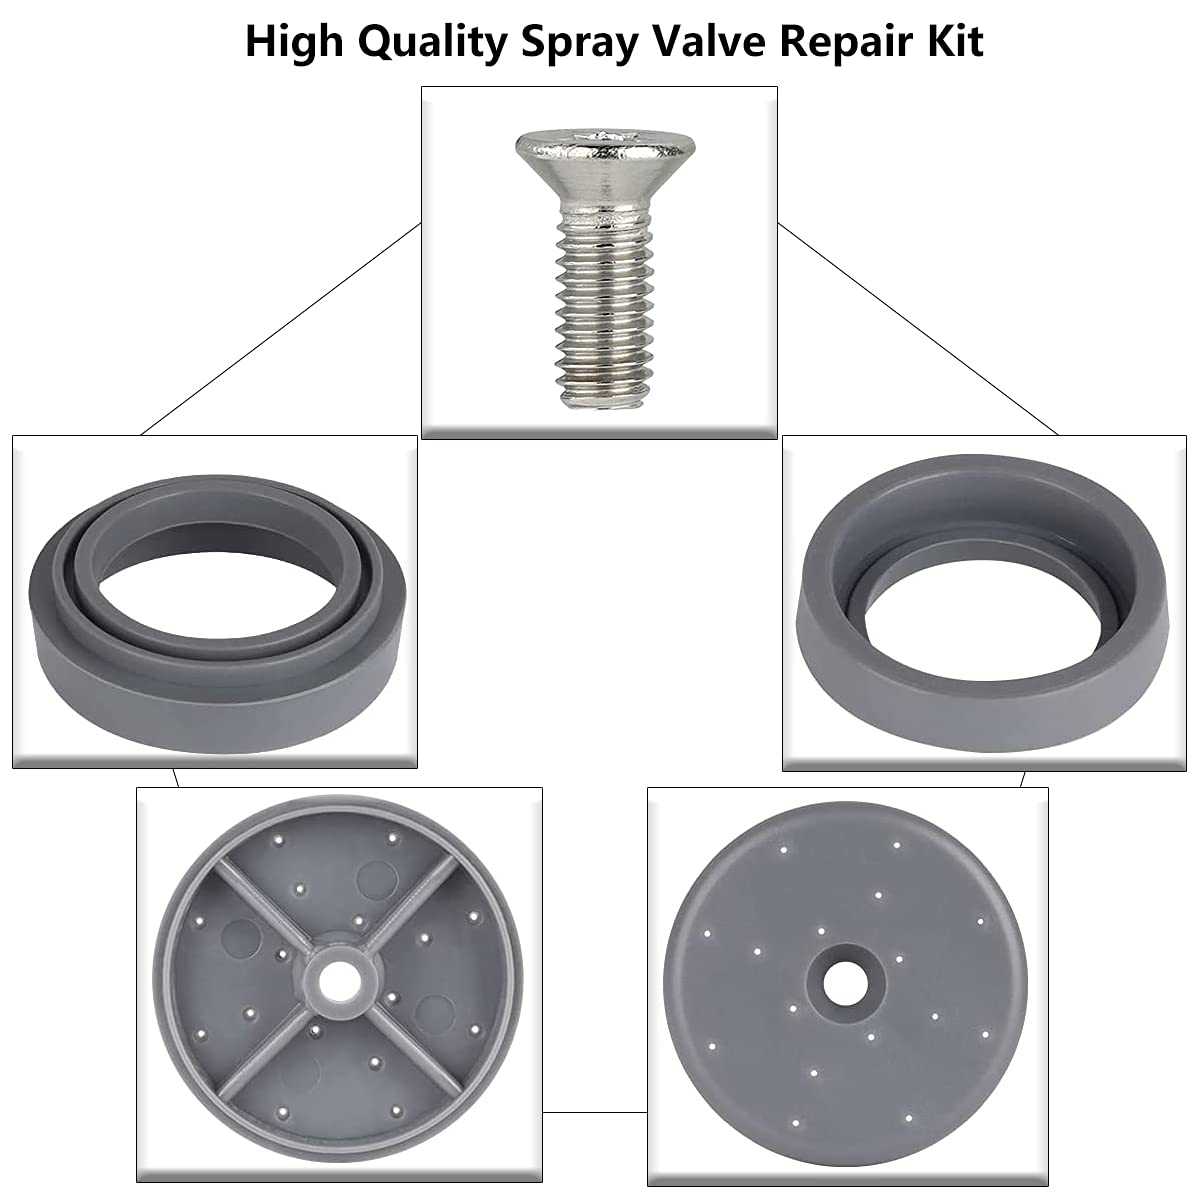 KOLLNIUN Pre-Rinse Spray Valve Repair Kit for Most Commercial Sink Faucet Dish Sprayer Touch On Kitchen Sink Faucets 1.42 GPM Spray Face Bumper and Screw Repair Part, Grey